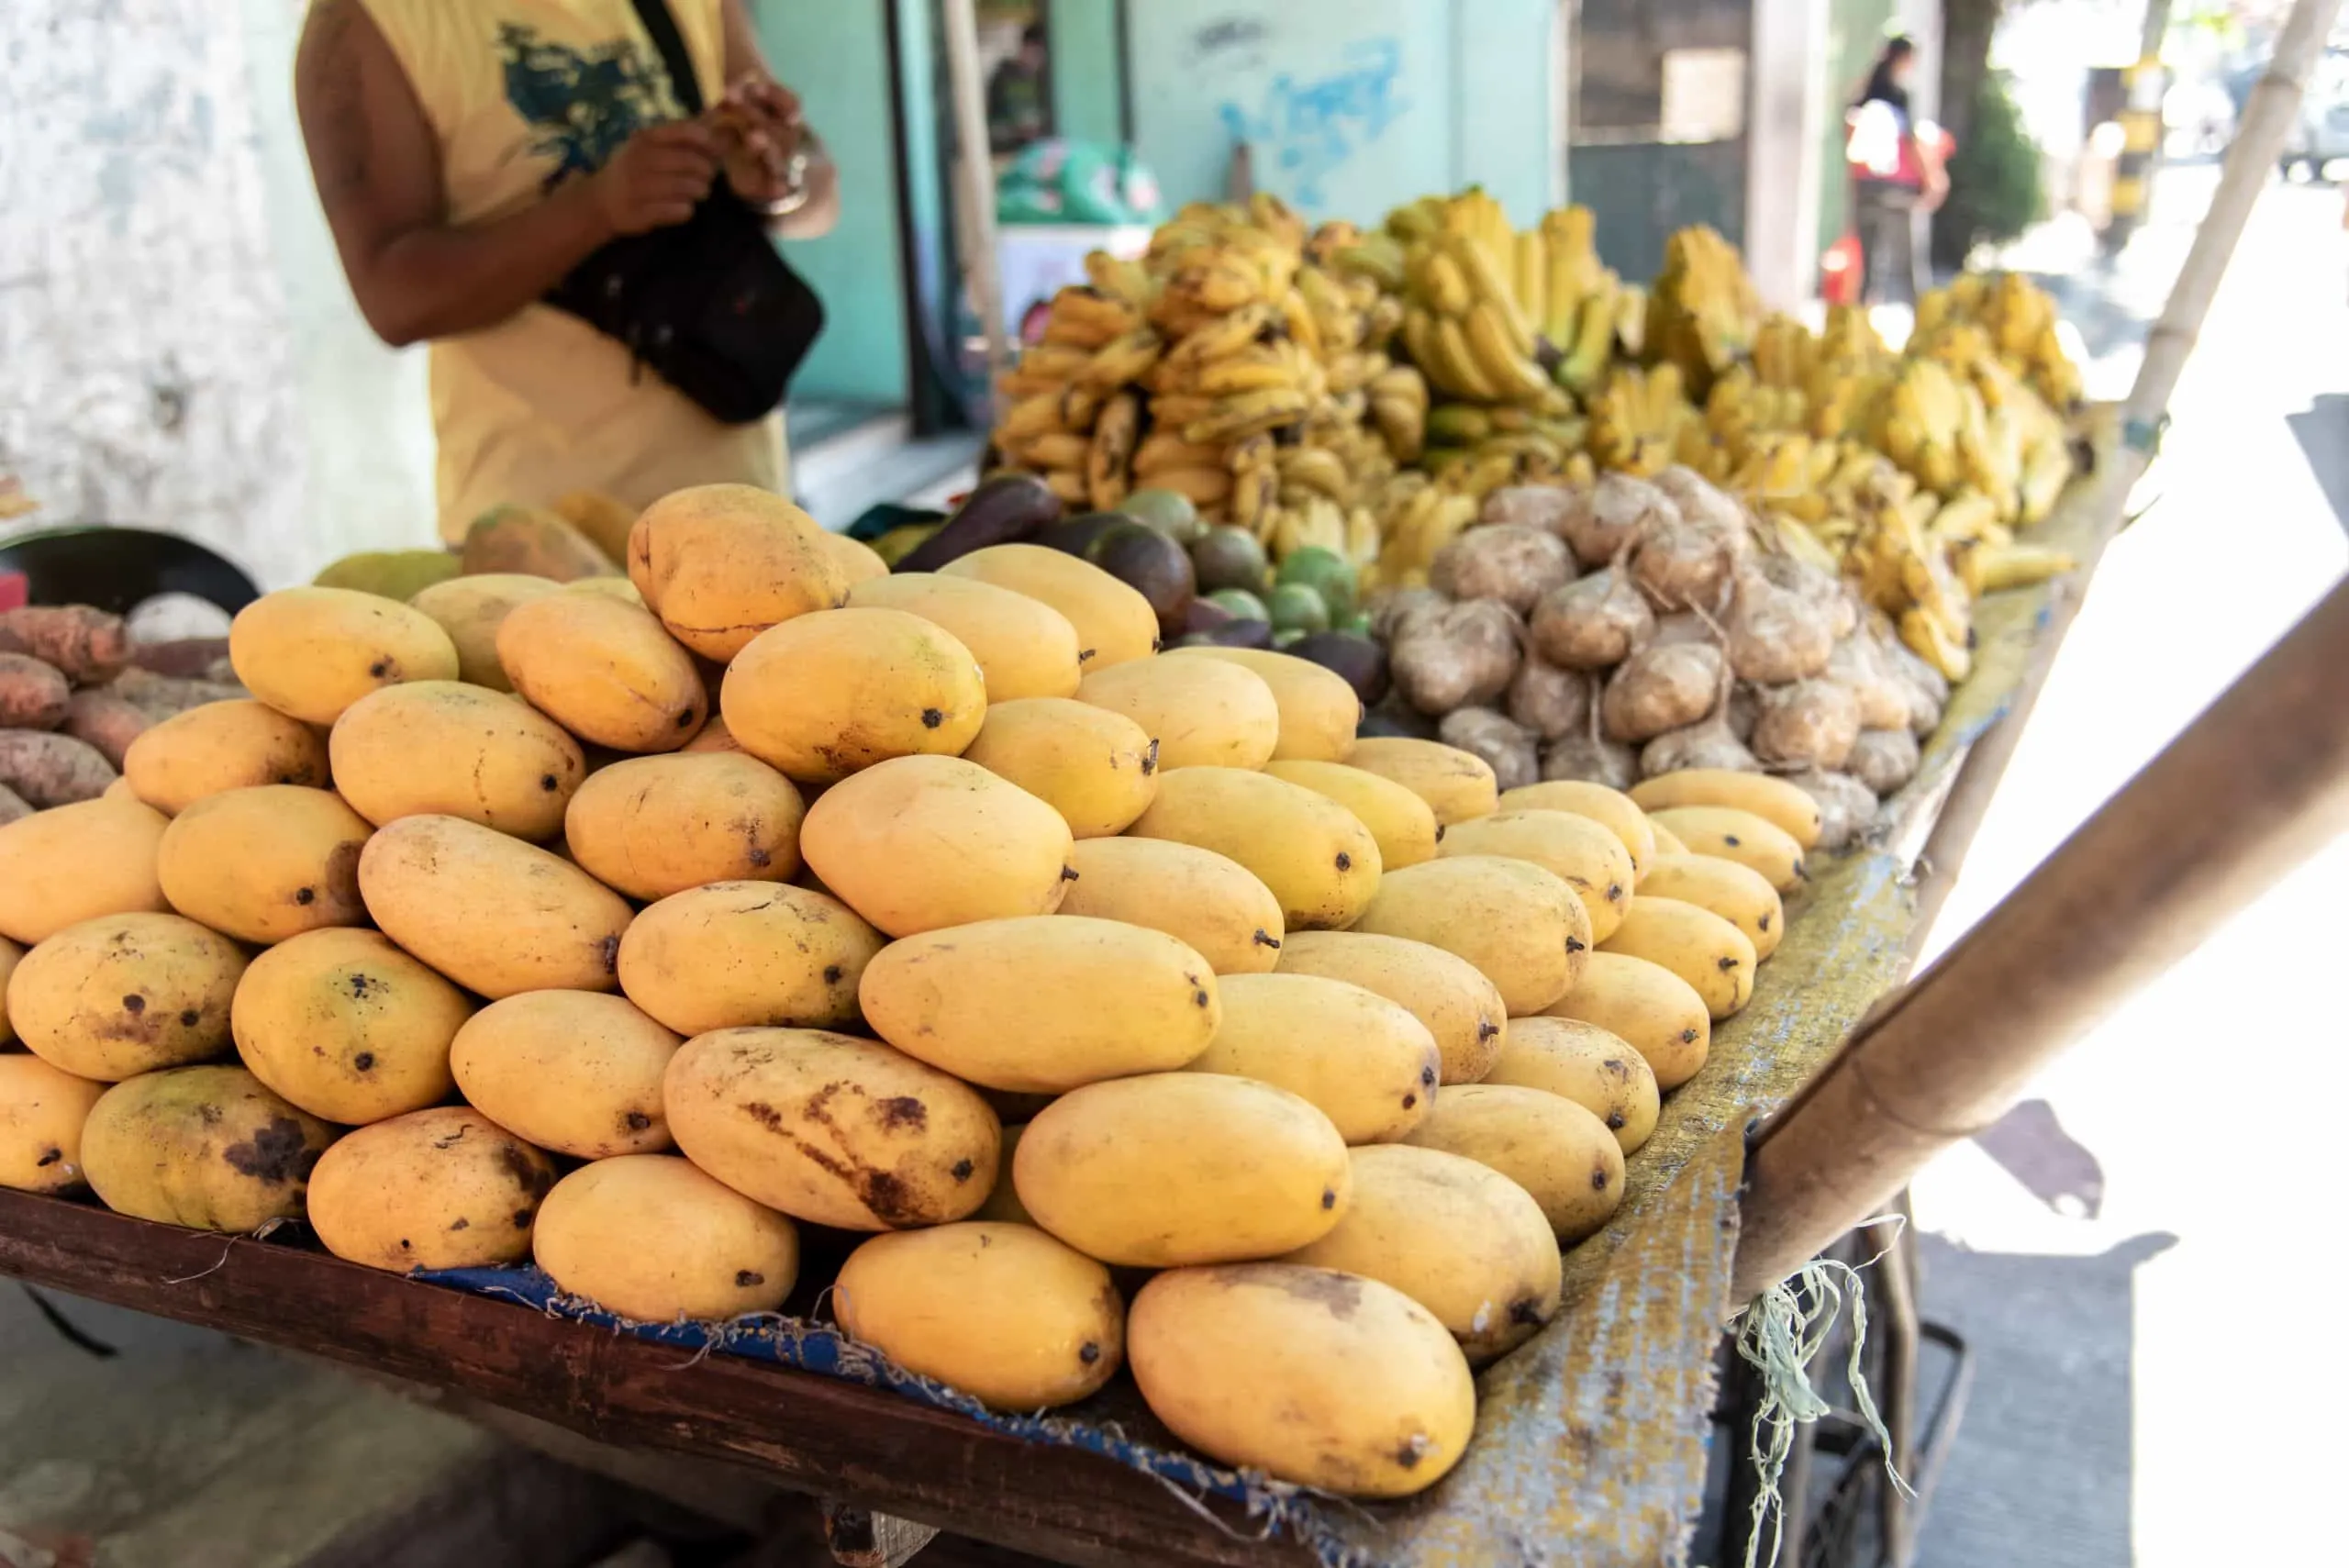 national fruit of the philippines, philippine fruits, filipino fruits, fruits in the philippines